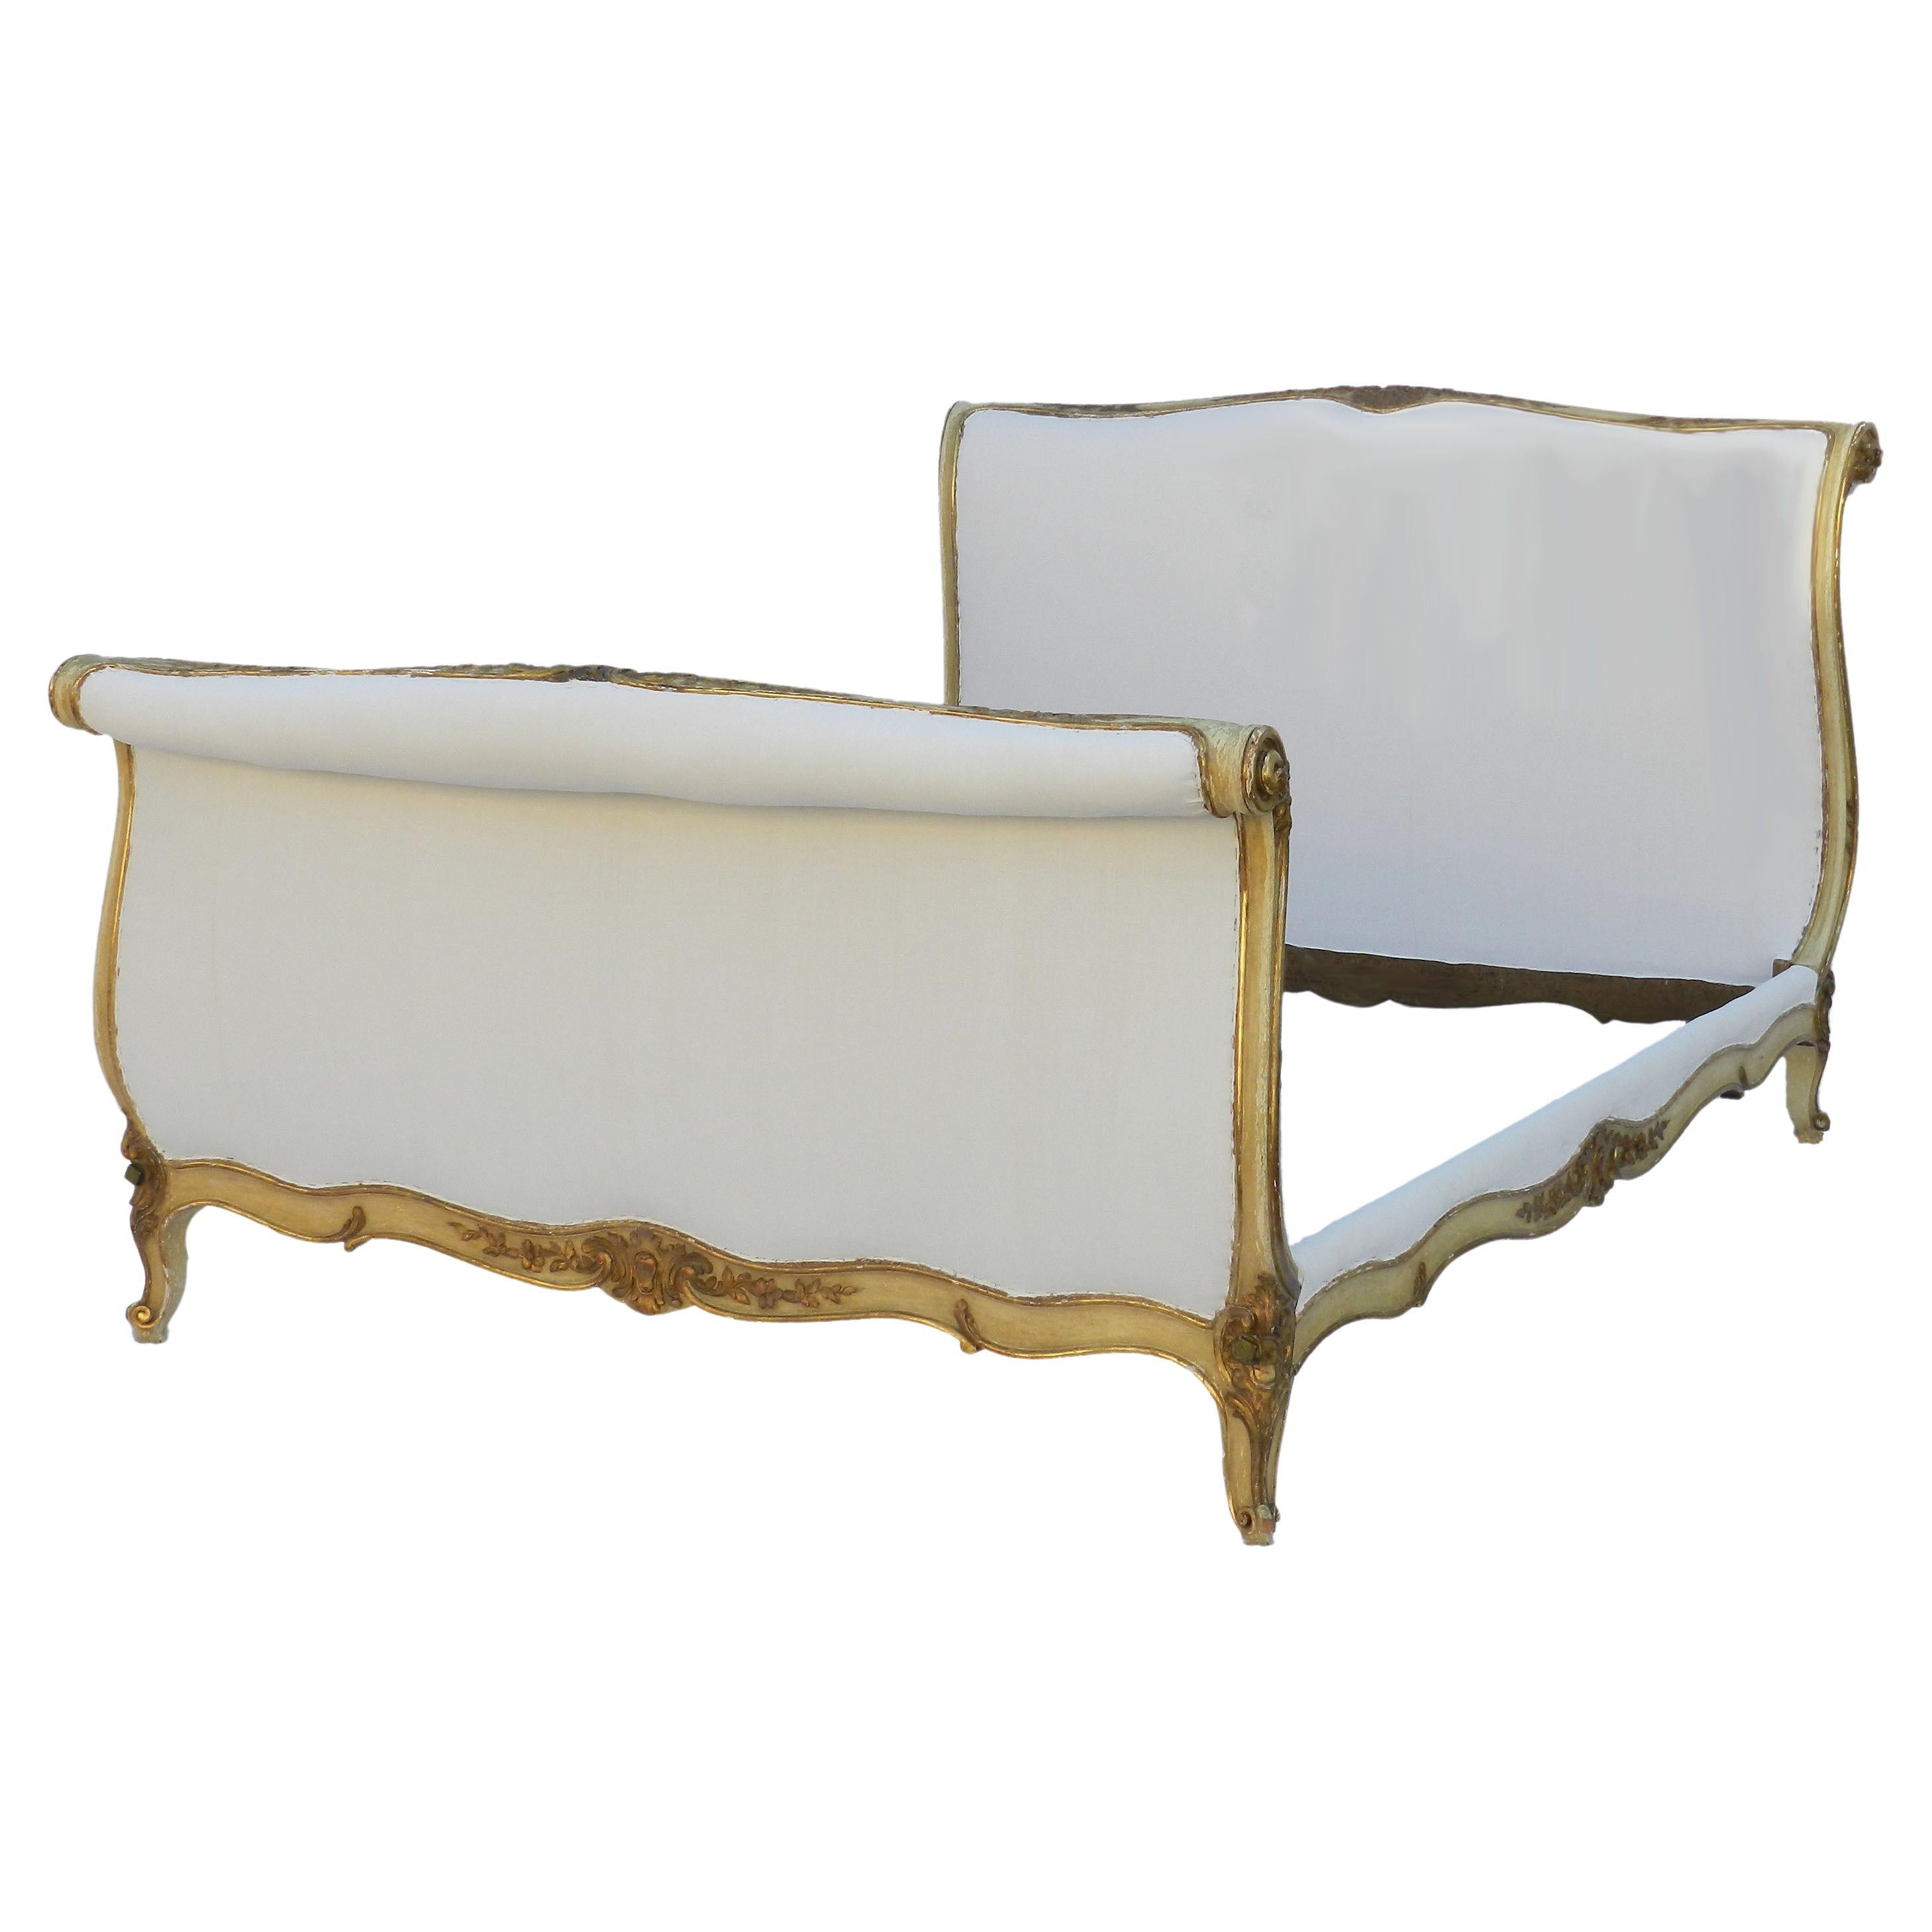 Antique bed US Queen UK King size gold French roll top 
Covered to White undercovers
Superb gloriously distressed patina 
Roll top 
Solid wood frame
The bed is sound and solid
This will take a US Queen or UK King size mattress either on wooden